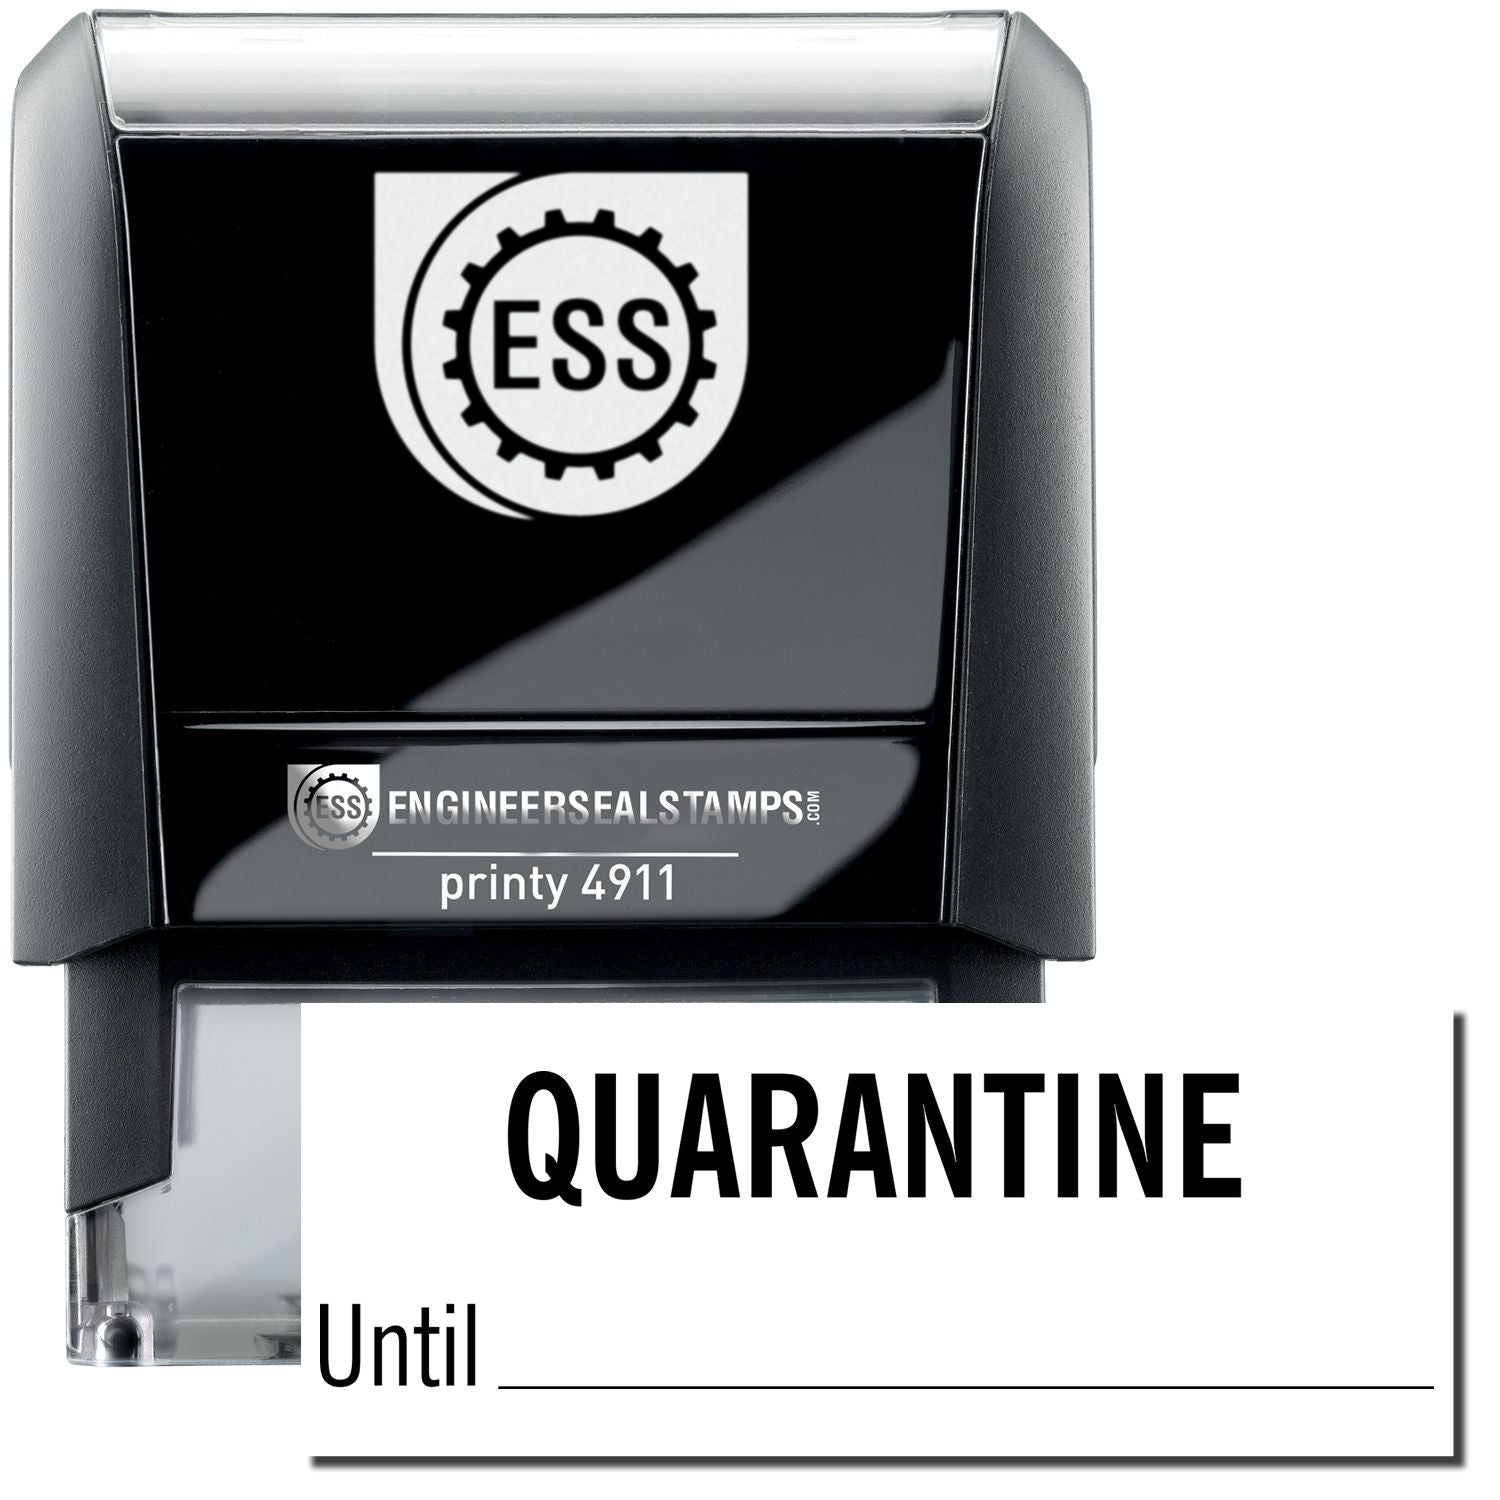 A self-inking stamp with a stamped image showing how the text "QUARANTINE Until" with a line is displayed after stamping.